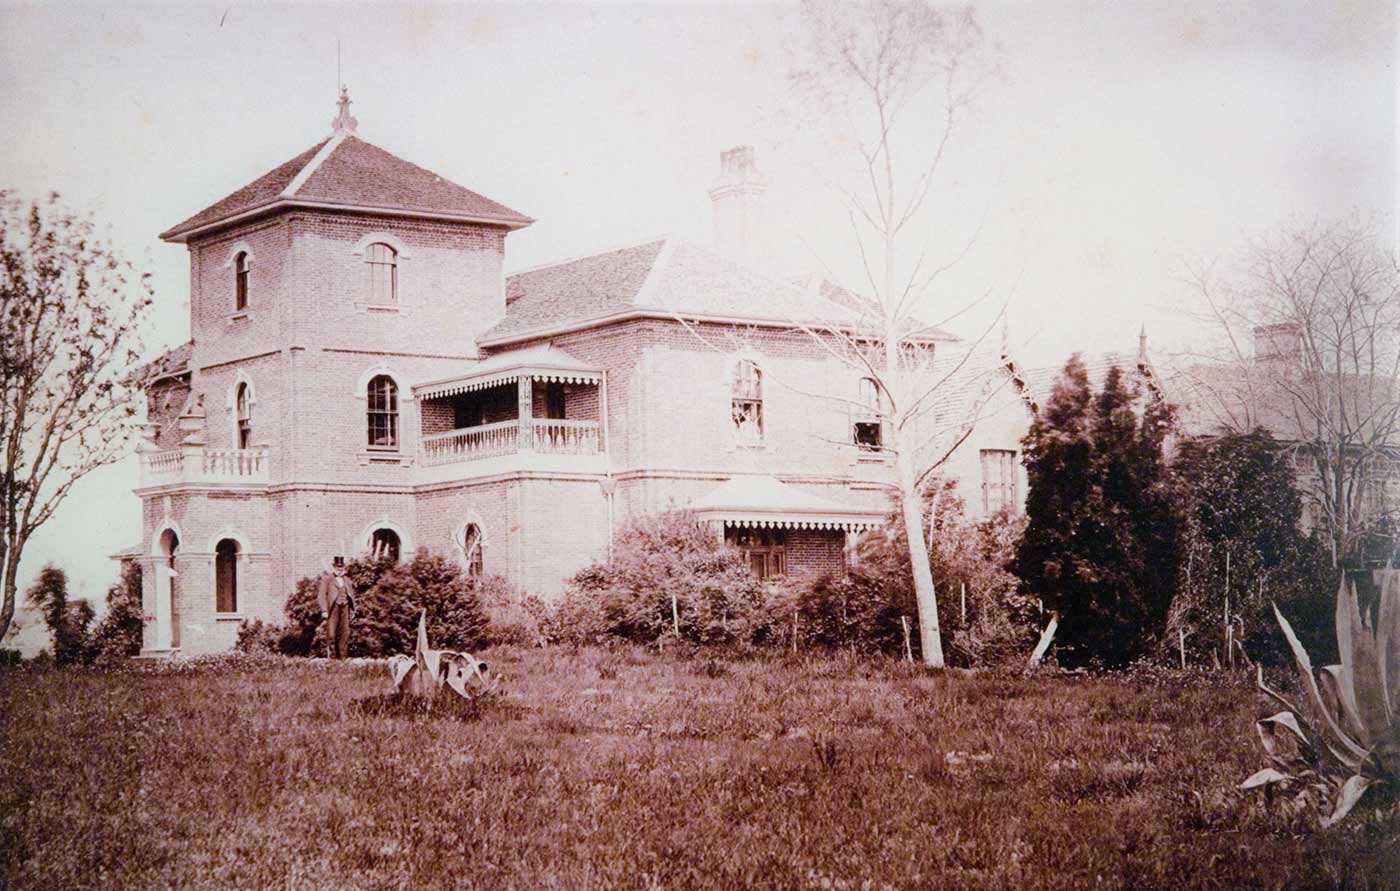 Photograph of homestead with lawn in front and a man standing in front of the house. - click to view larger image